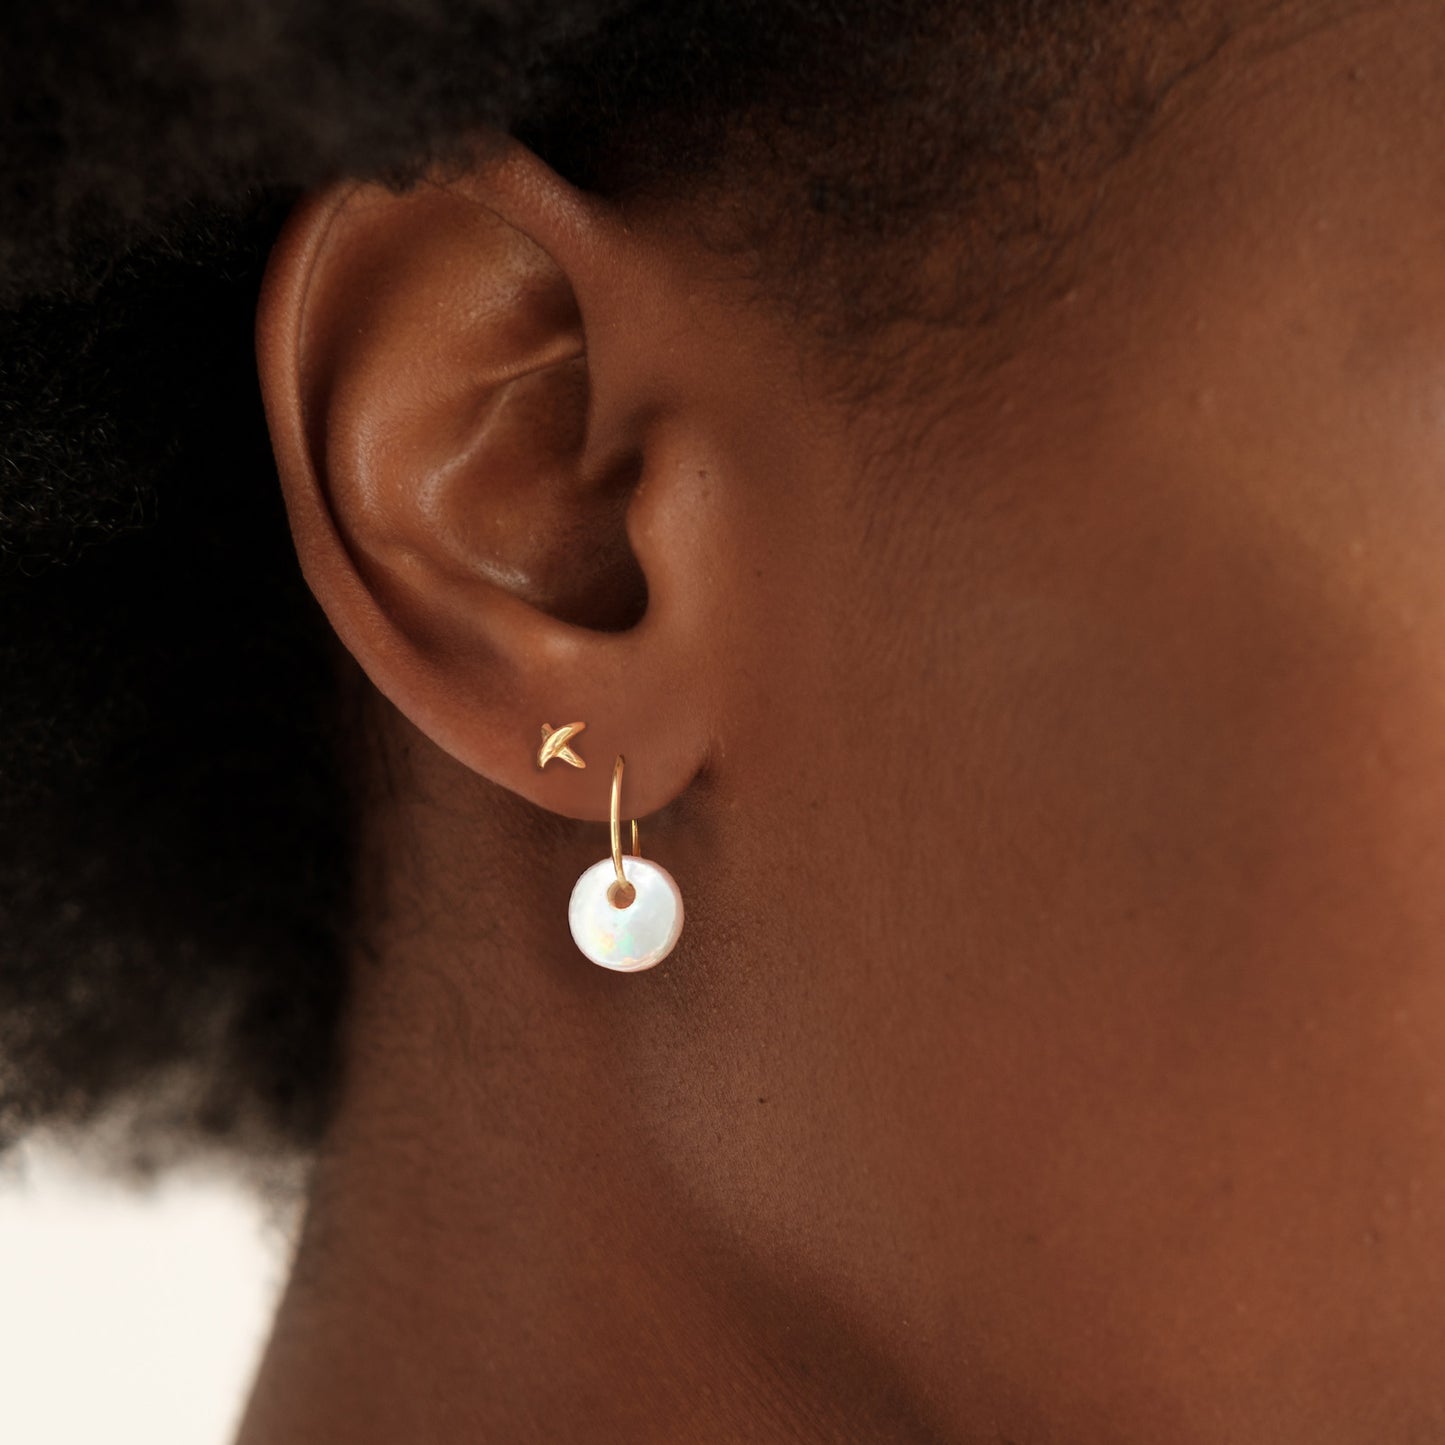 14k gold Stitch Stud Earrings styled on a ear with a coin pearl hoop